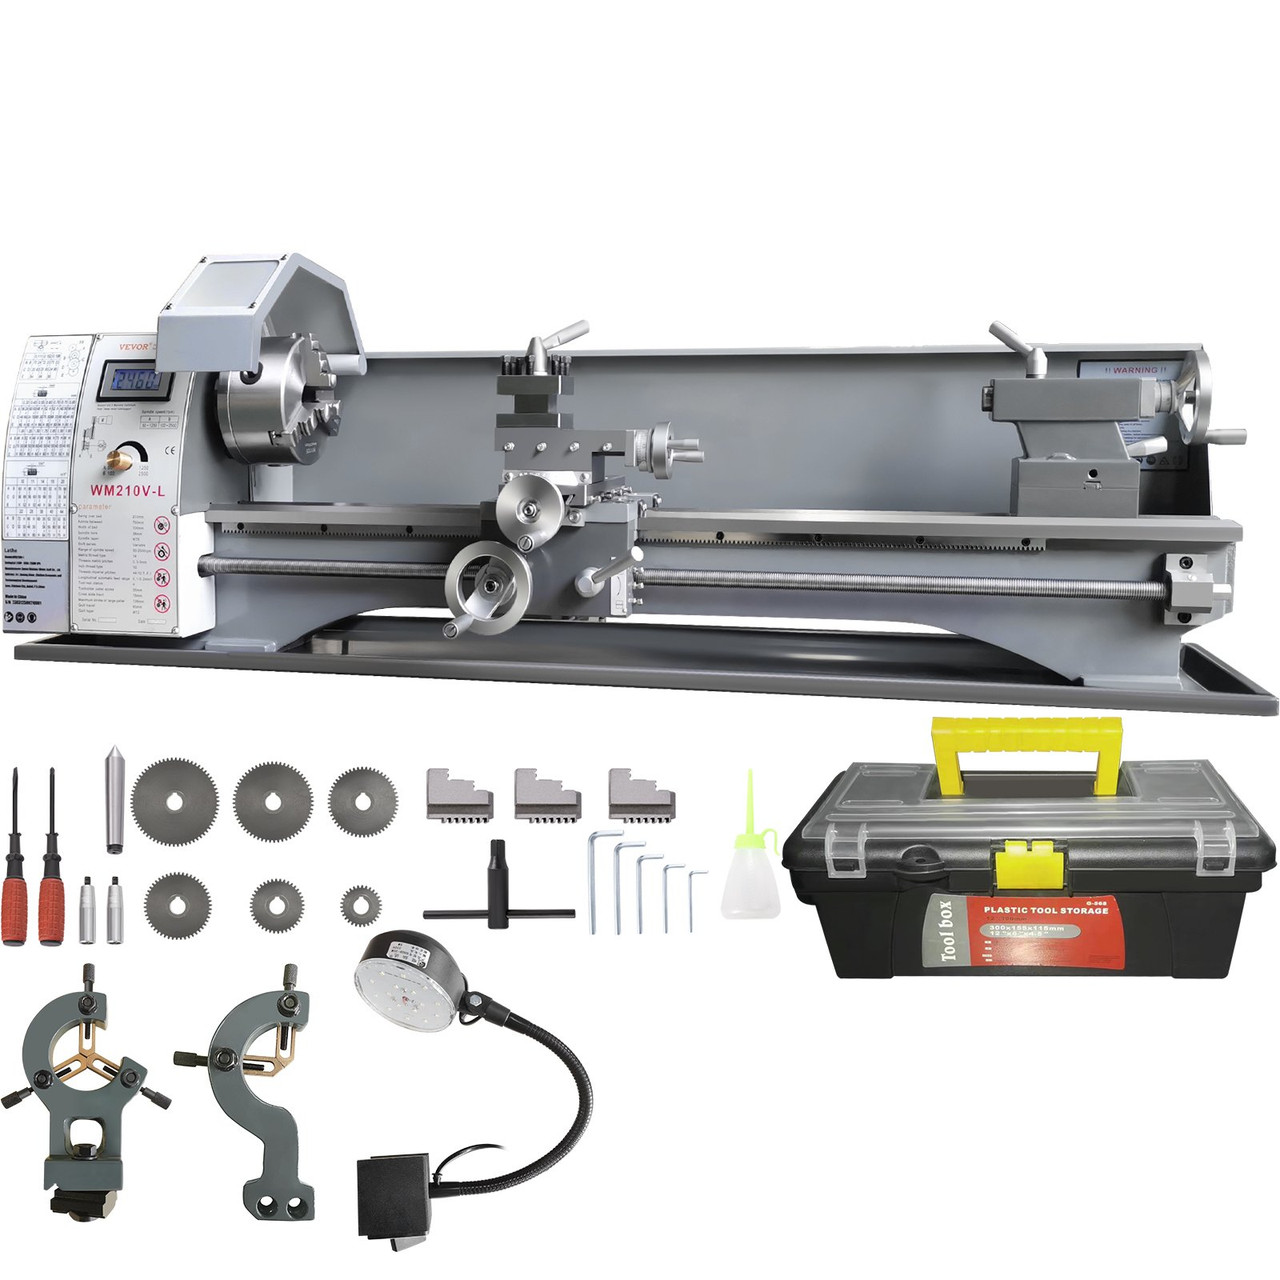 Metal Lathe Machine, 8.3'' x 29.5'', Precision Benchtop Power Metal Lathe, 0-2500 RPM Continuously Variable Speed, 750W Brushless Motor Metal Gears, with Tool Box for Processing Precision Parts